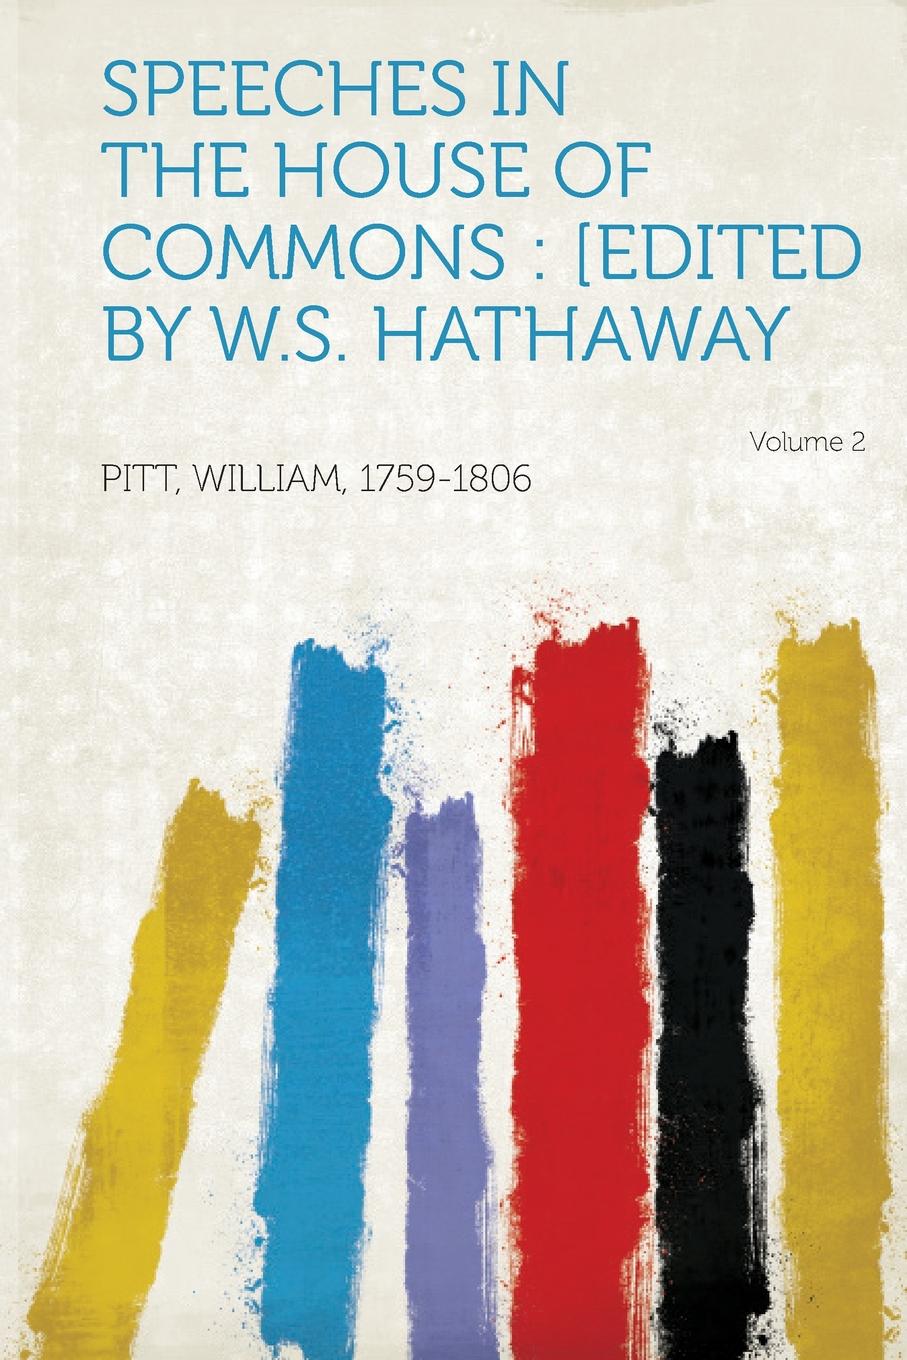 Speeches in the House of Commons. .Edited by W.S. Hathaway Volume 2